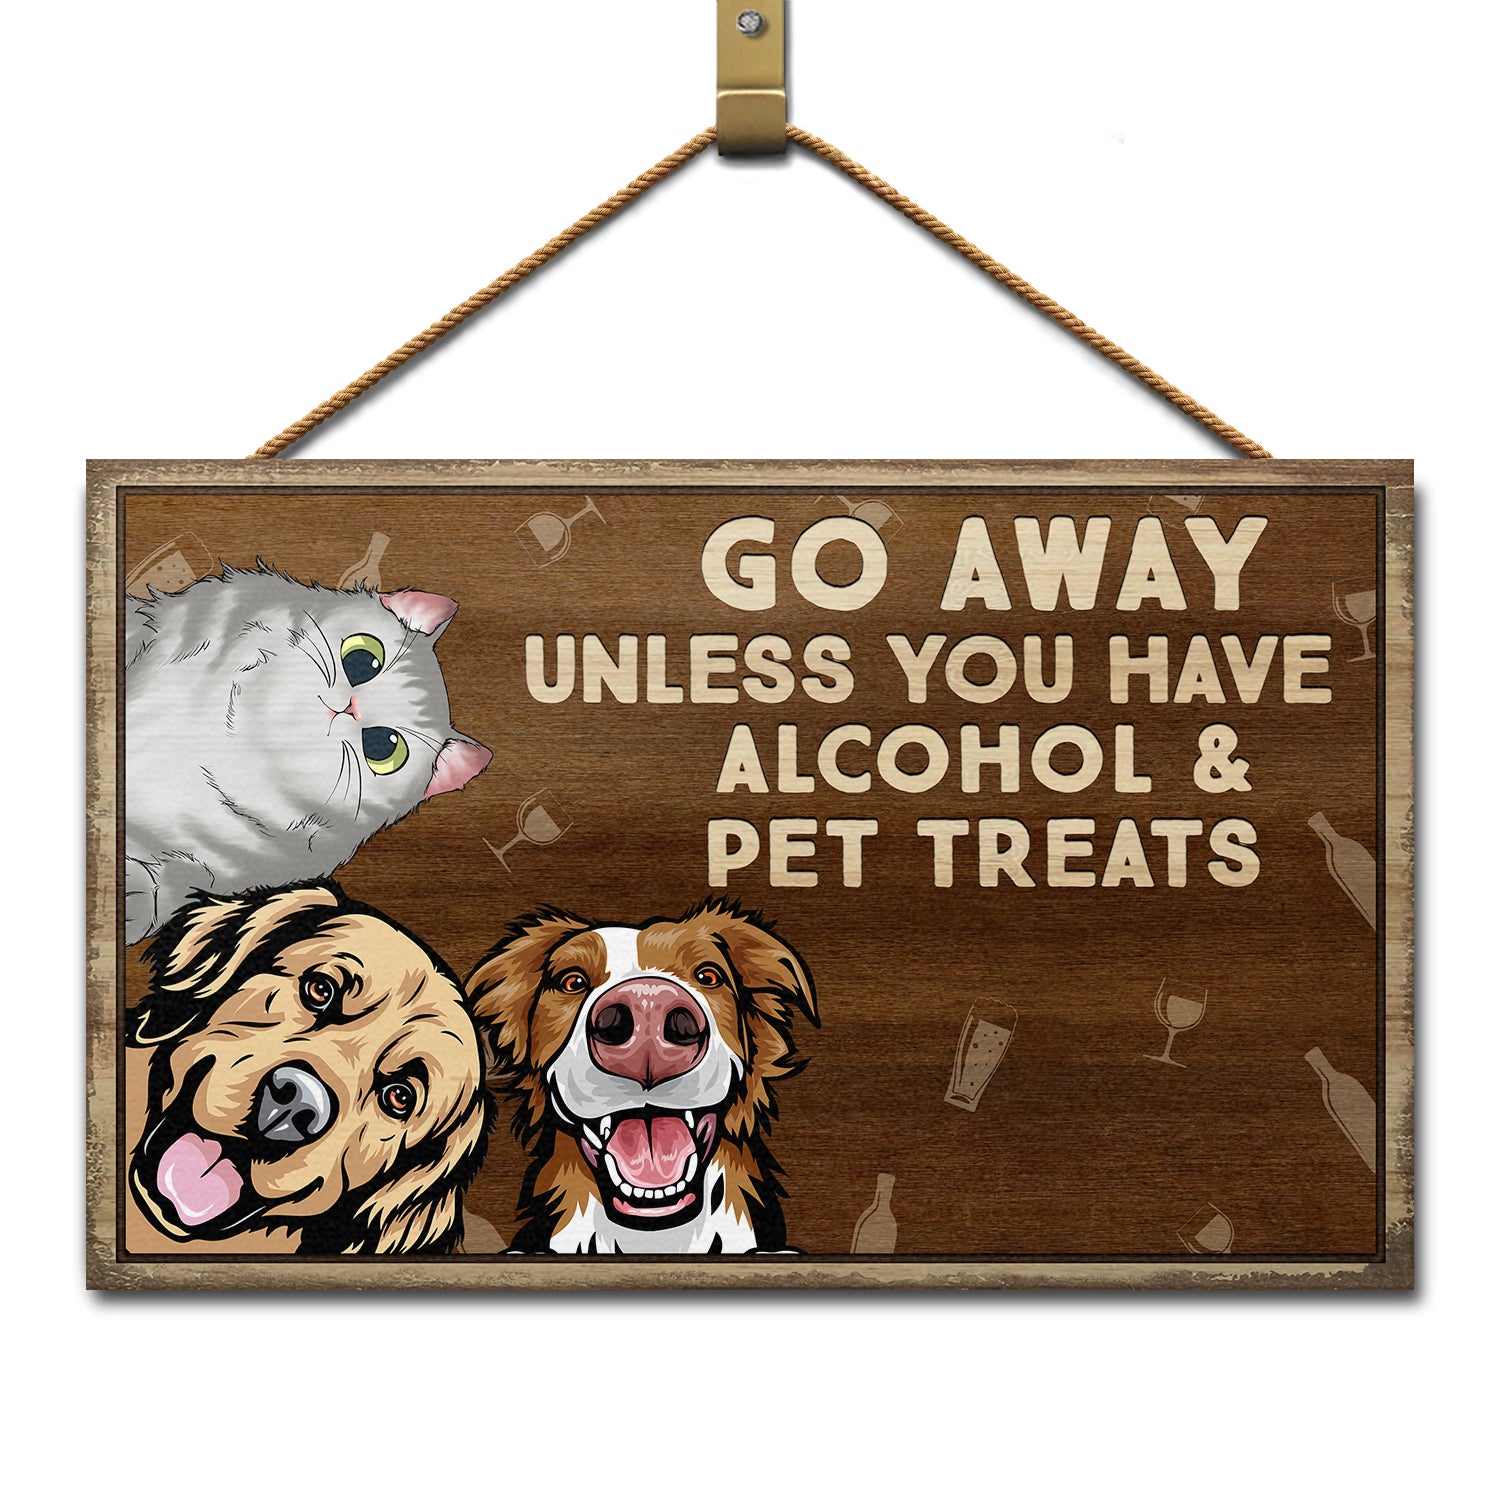 Go Away Unless You Have Alcohol And Dog Treats Cat Treats Pet Treats - Home Decor, Birthday, Housewarming Gift For Dog Lovers & Cat Lovers - Personalized Custom Wood Rectangle Sign